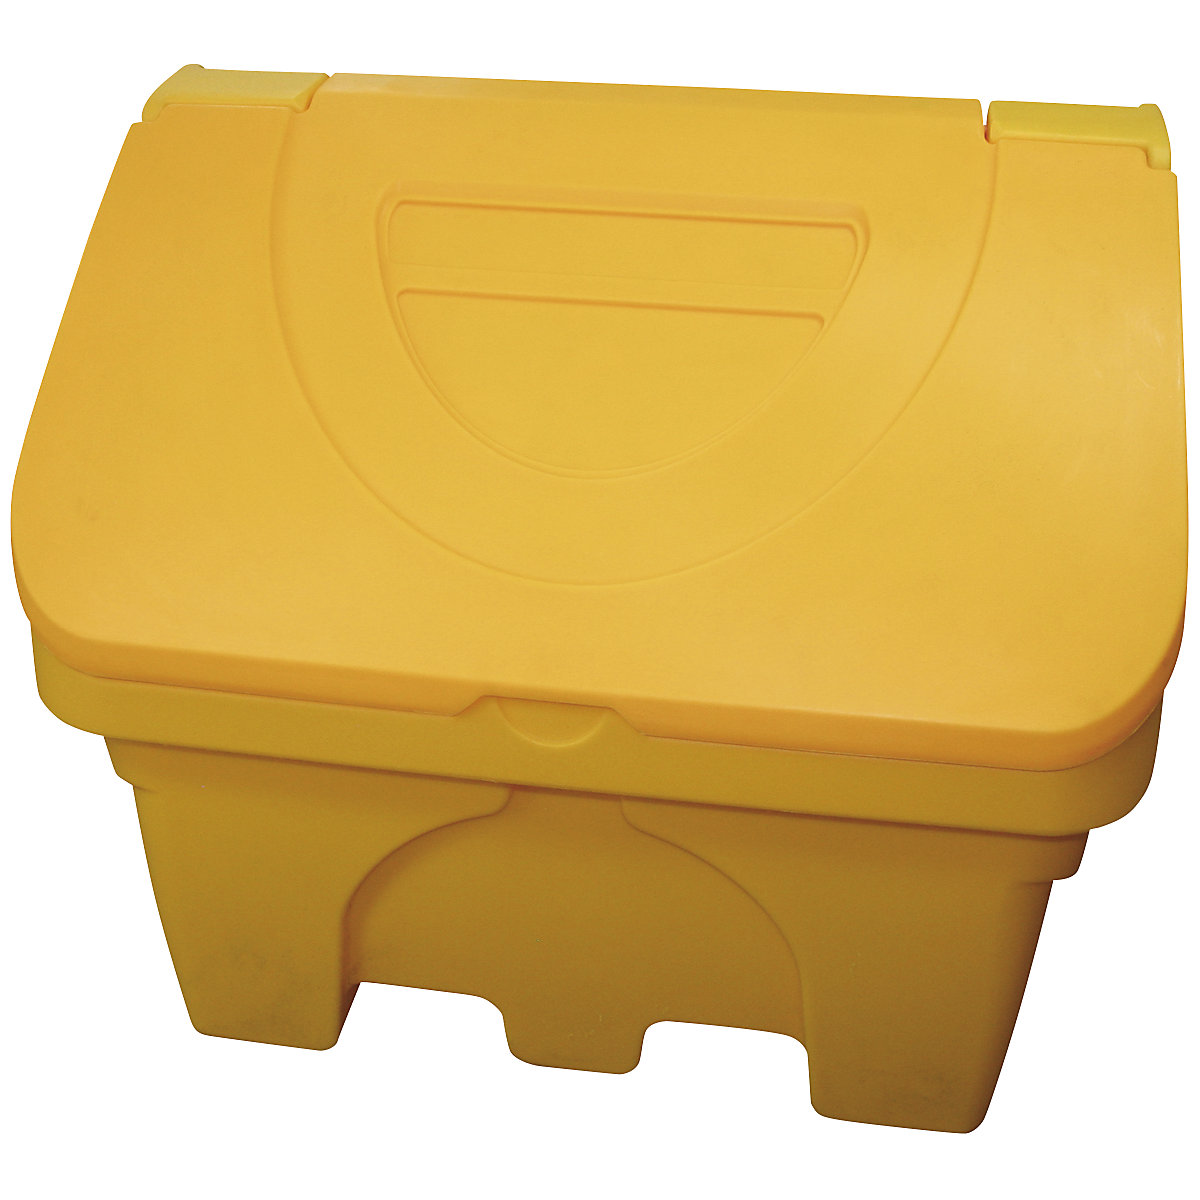 Storage and grit container – eurokraft basic